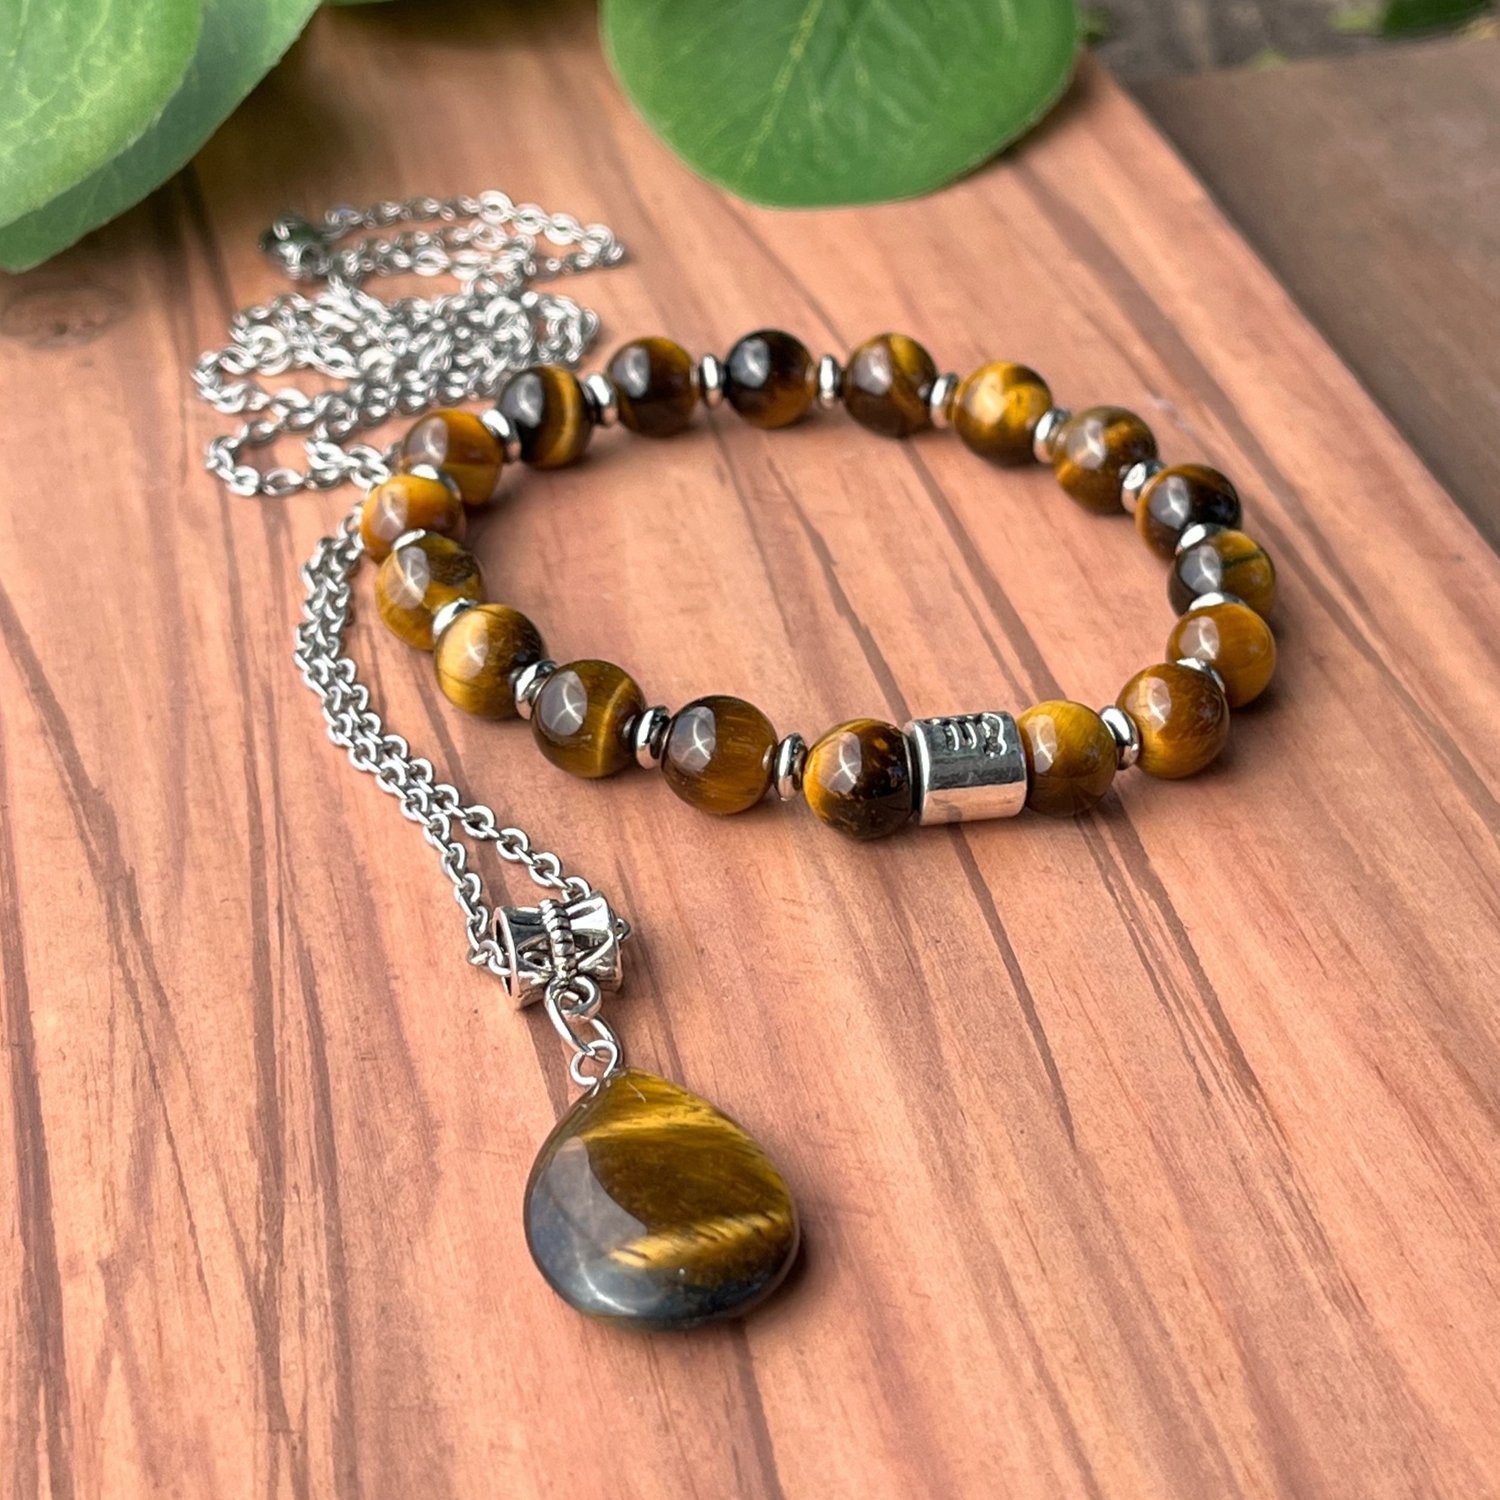 Bead Necklace~Tiger's Eye